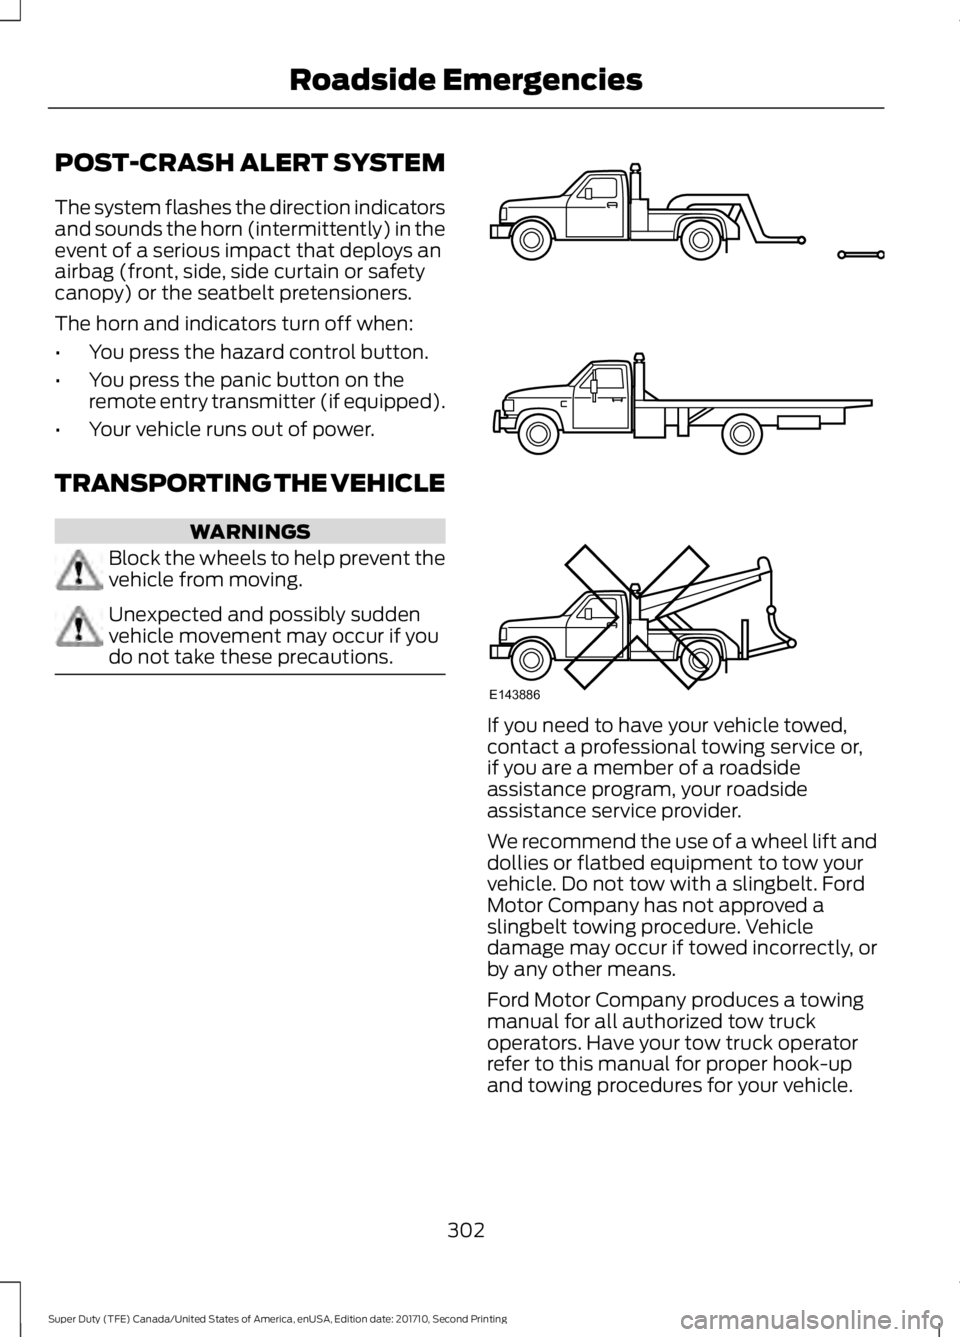 FORD F450 SUPER DUTY 2017  Owners Manual POST-CRASH ALERT SYSTEM
The system flashes the direction indicatorsand sounds the horn (intermittently) in theevent of a serious impact that deploys anairbag (front, side, side curtain or safetycanopy